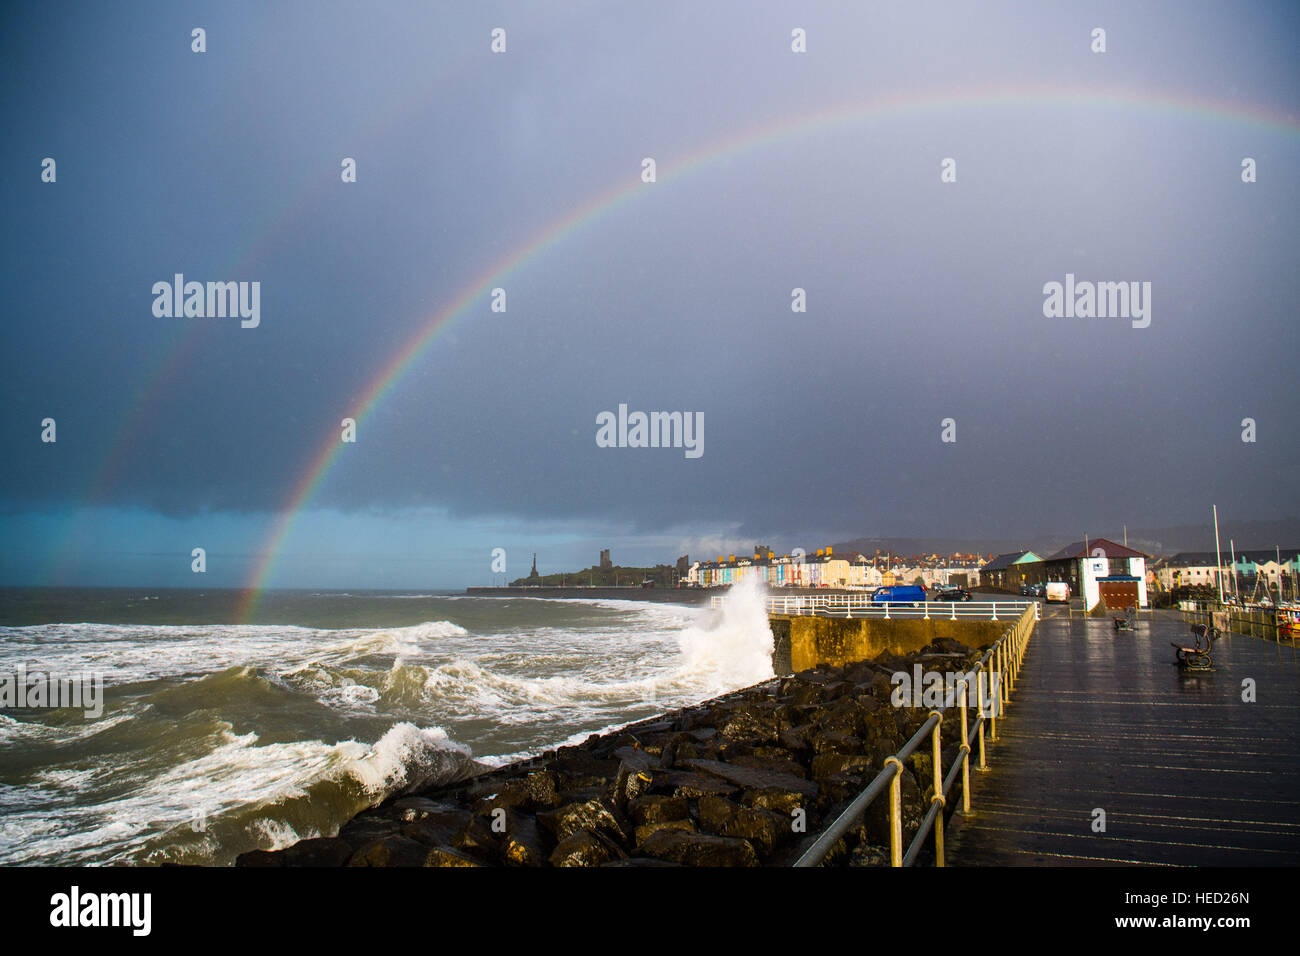 Aberystwyth, Wales, UK. 21 December 2016. UK Weather. On the shortest day of the year, the Winter Solstice, a change in the weather brings showers of rain and gusty winds combined with the high tide to drive huge waves to batter the seafront and harbor wall at Aberystwyth on the Cardigan Bay coast of the Irish Sea in West Wales UK In a brief respite from the rain, a rainbow forms over the town and stormy seas photo © Keith Morris/Alamy Live News Stock Photo